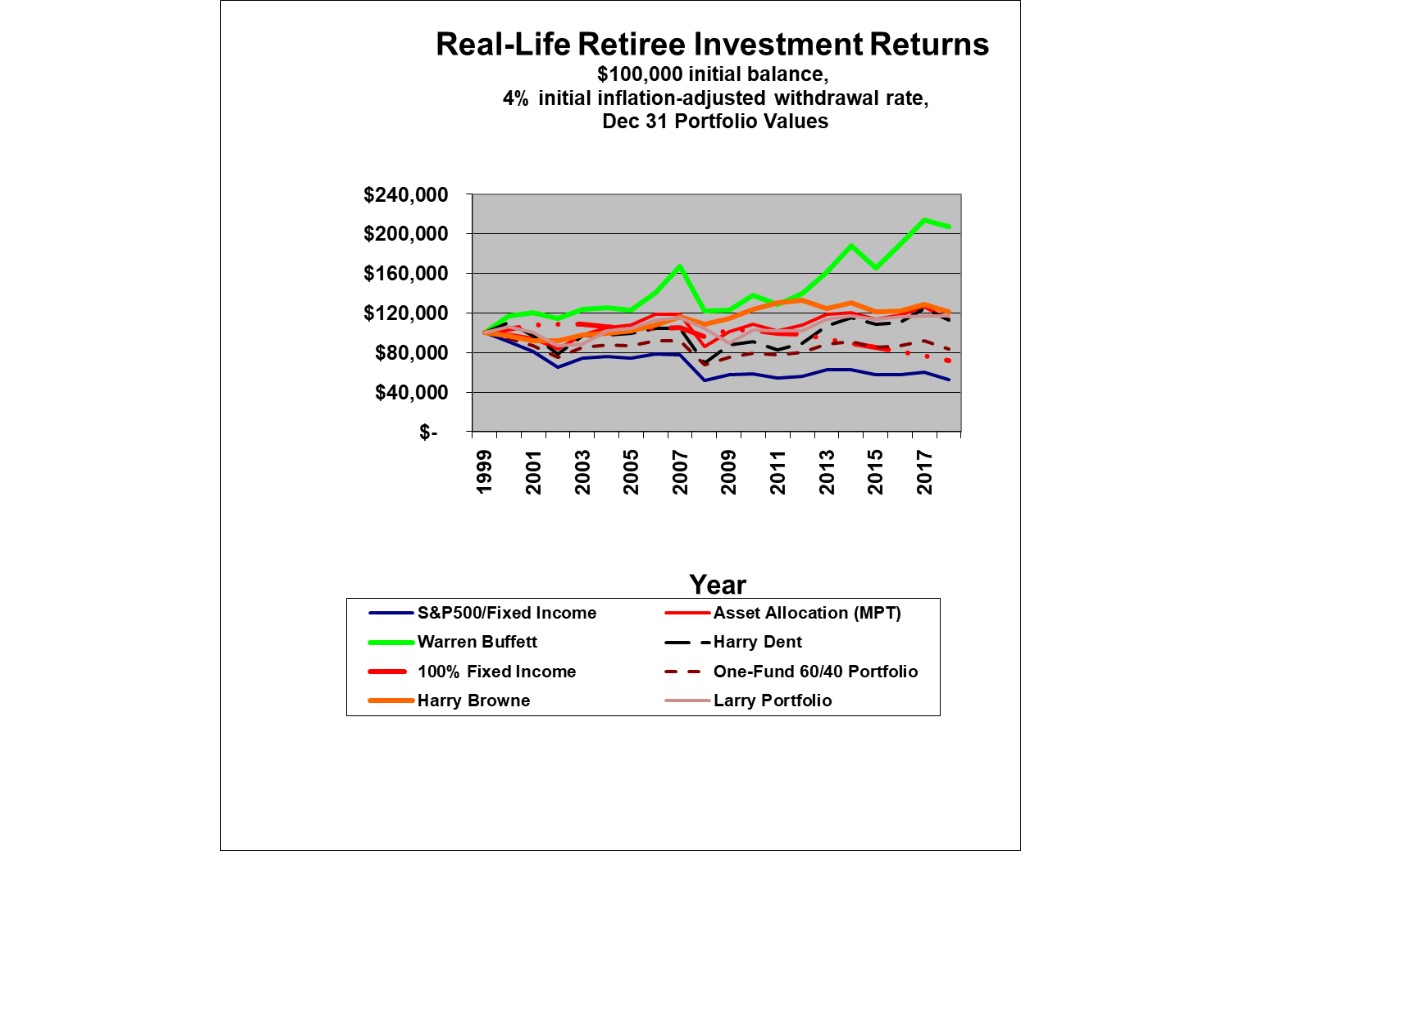 2018 Update: Real-Life Retiree Investment Returns